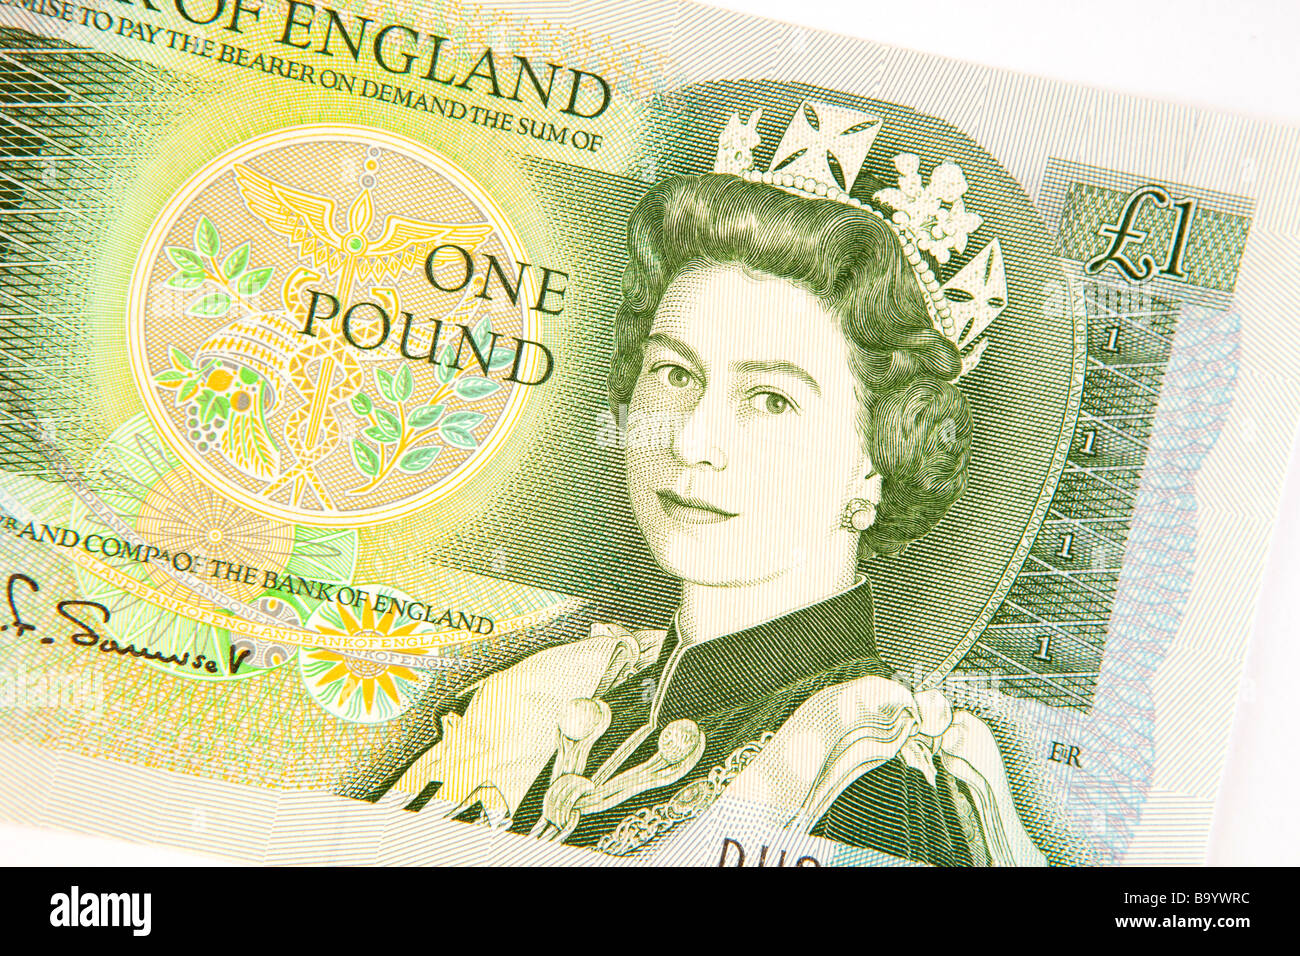 Money currency detail of old British one pound banknote Stock Photo